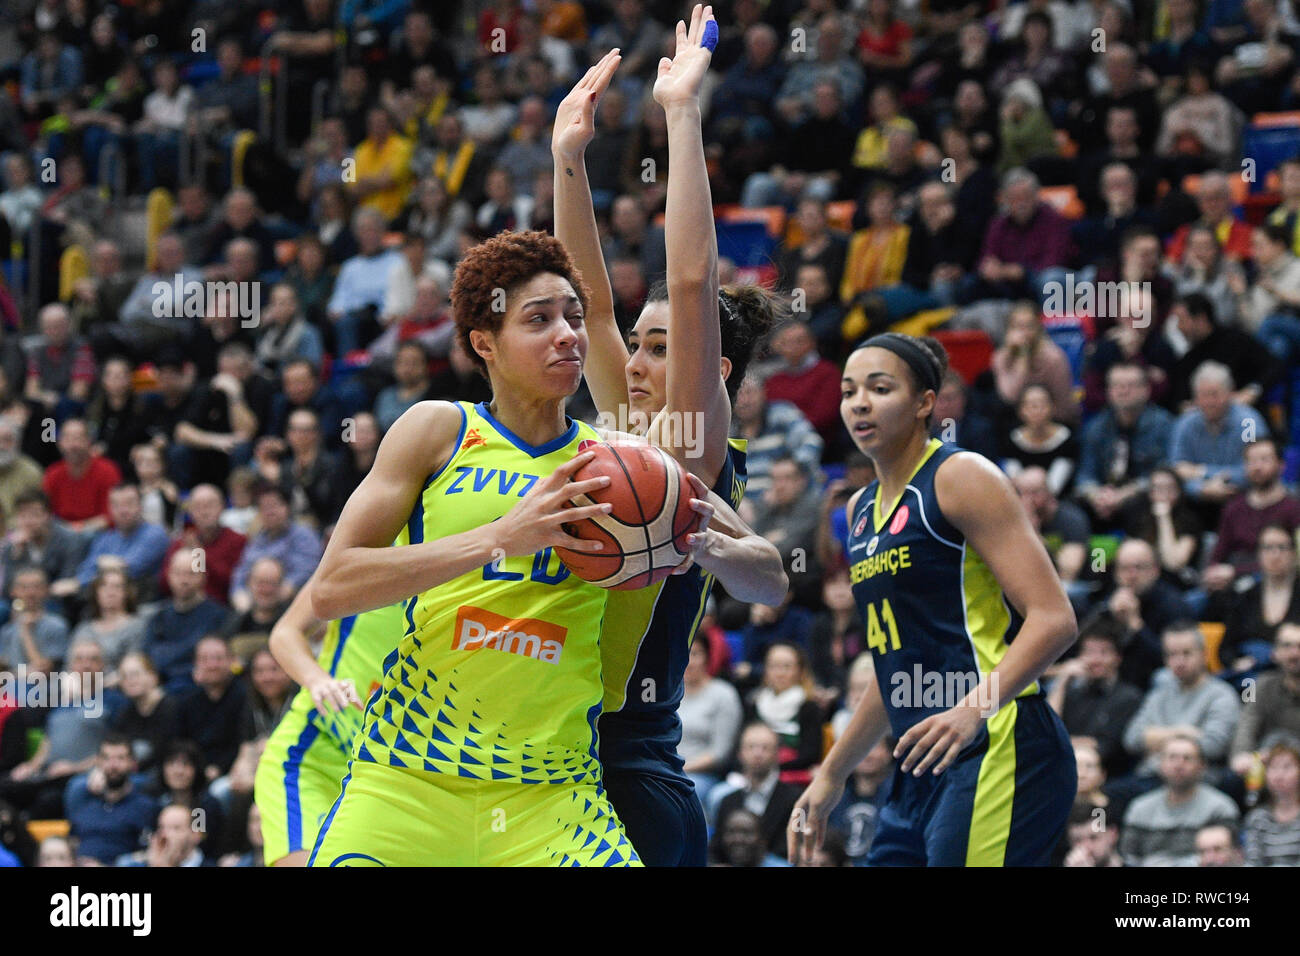 The Czech team USK Prague beat Fenerbahce Istanbul 76-54 in a women's basketball European League quarterfinal match in Prague, Czech Republic, March 5, 2019. L-R ISABELLE HARRIS of USK, TUGCE CANITEZ of Fenerbahce in action . (CTK Photo/Michal Kamaryt) Stock Photo